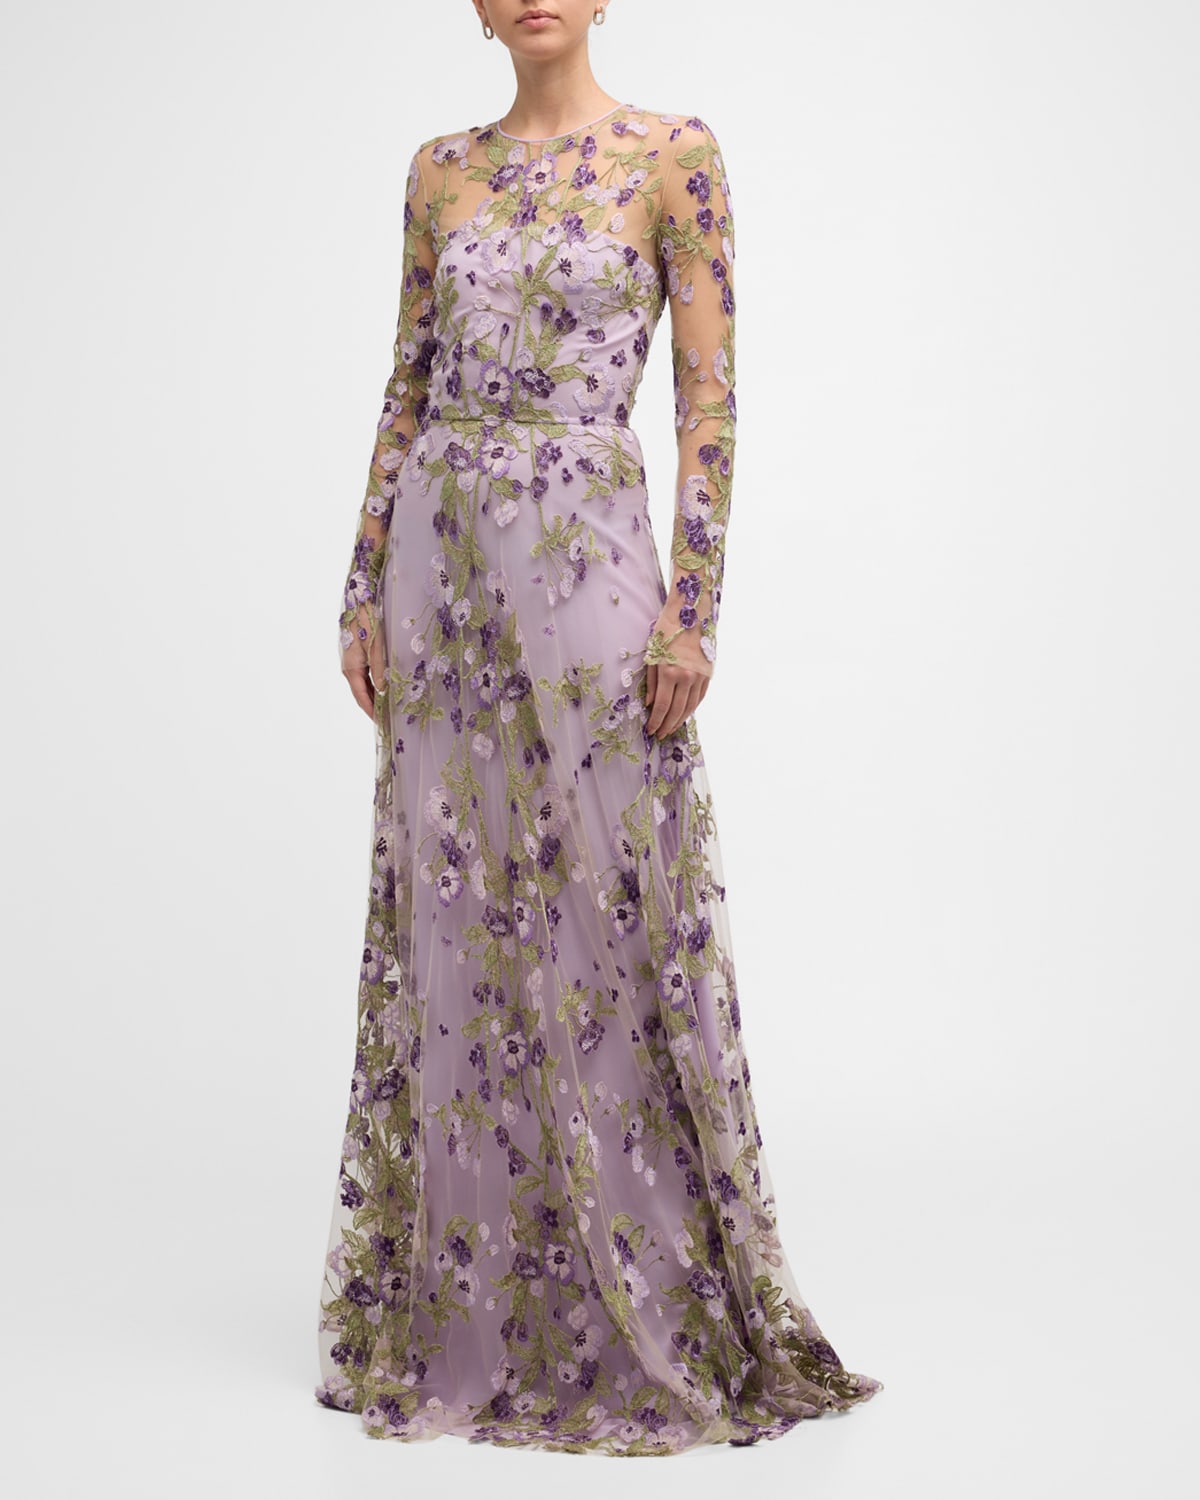 Embroidered Floral Gown with Sheer Overlay